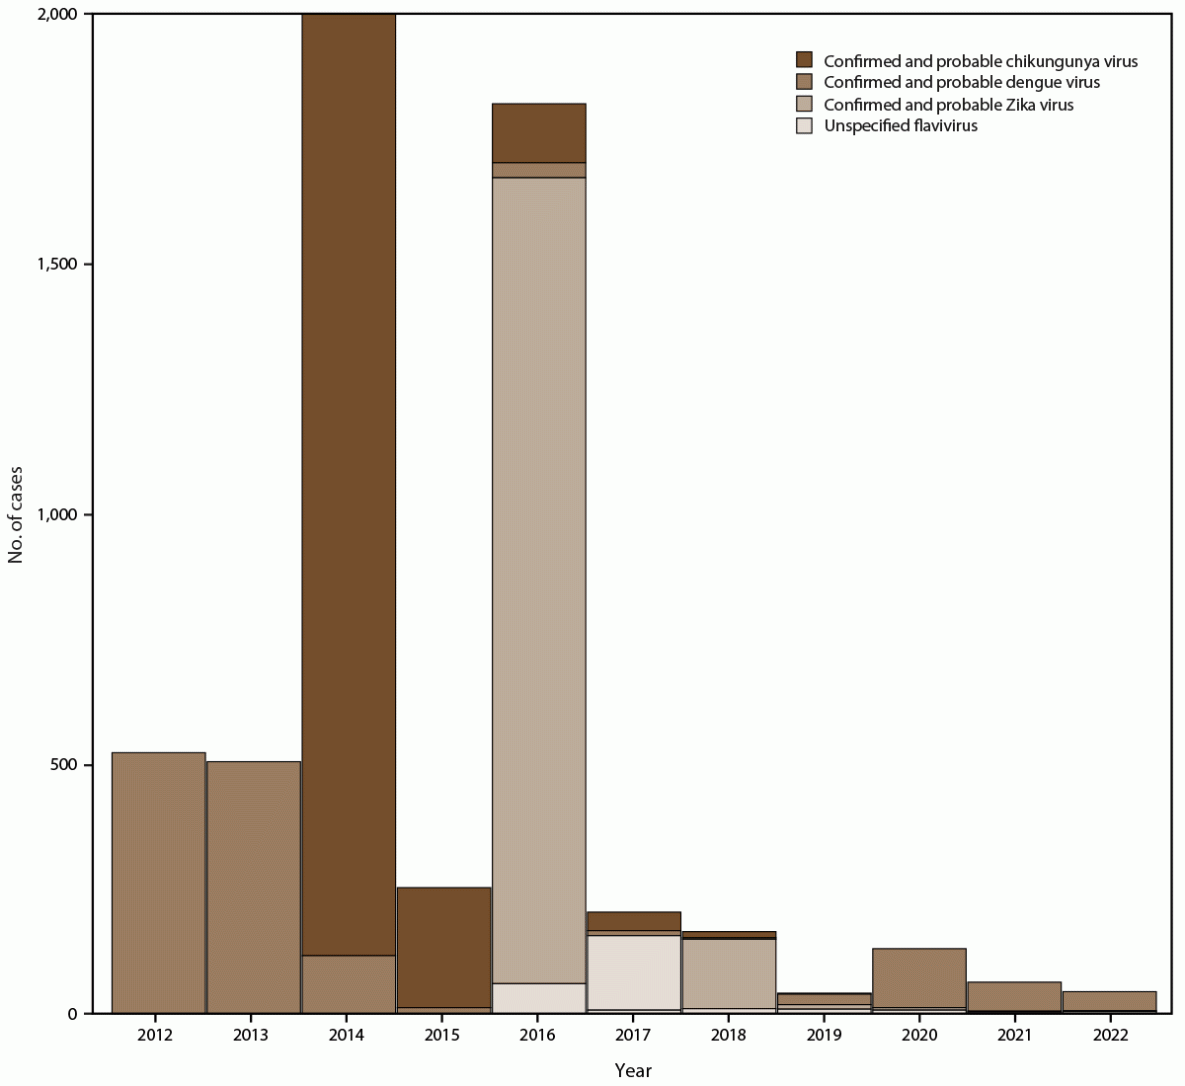 The figure is a histogram that illustrates the confirmed or probable dengue, chikungunya, and Zika virus cases, by year, during May 2012–December 2022 in Puerto Rico. The data are from the Sentinel Enhanced Dengue Surveillance System.